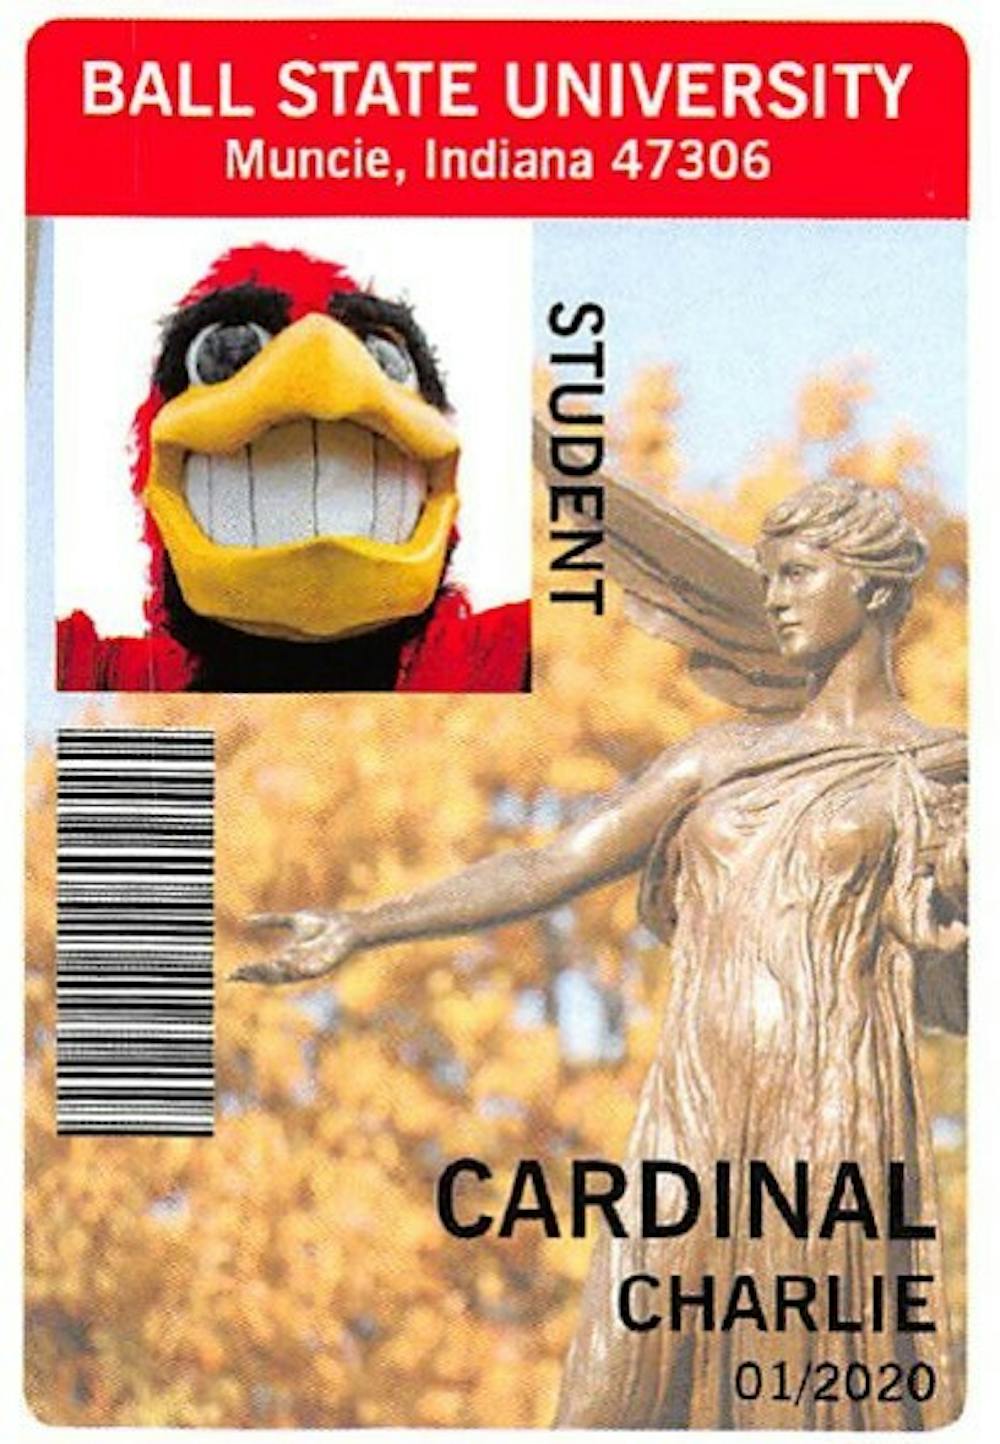 On Aug. 15, the cost to replace your student ID card will increase to $25 from $10. Both Indiana University and Purdue University charge $25 to replace student IDs.&nbsp;PHOTO PROVIDED BY NANCY CRONK